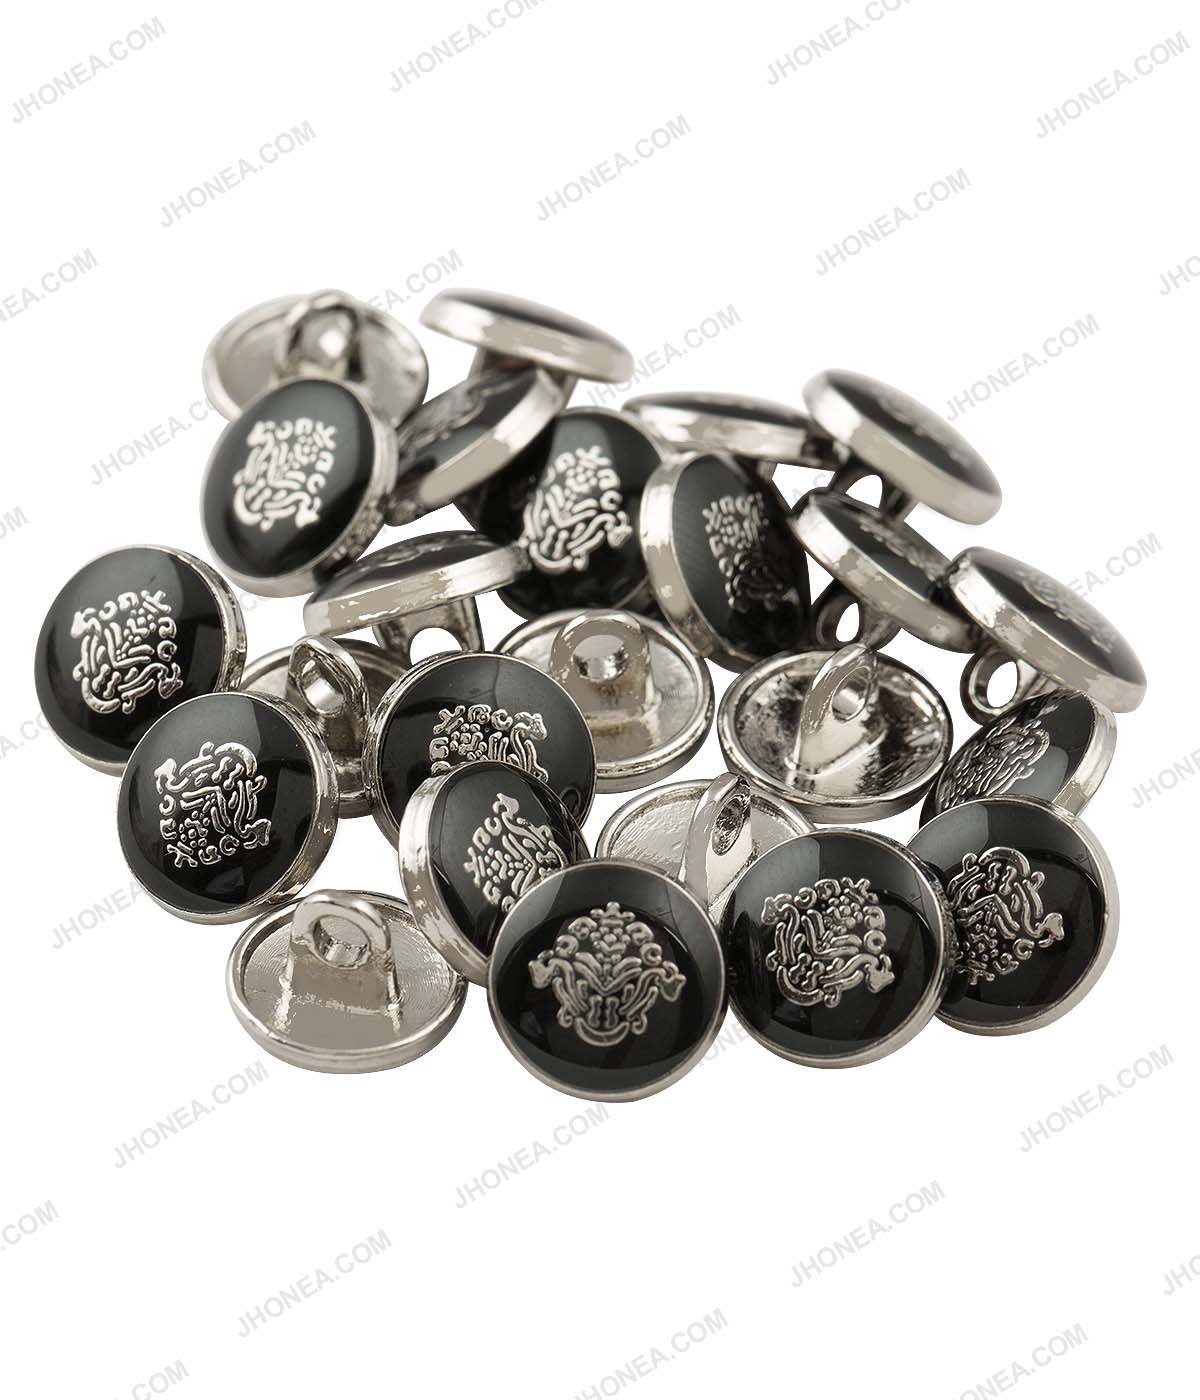 Classy Silver with Black Lamination Metal Buttons for Shirts